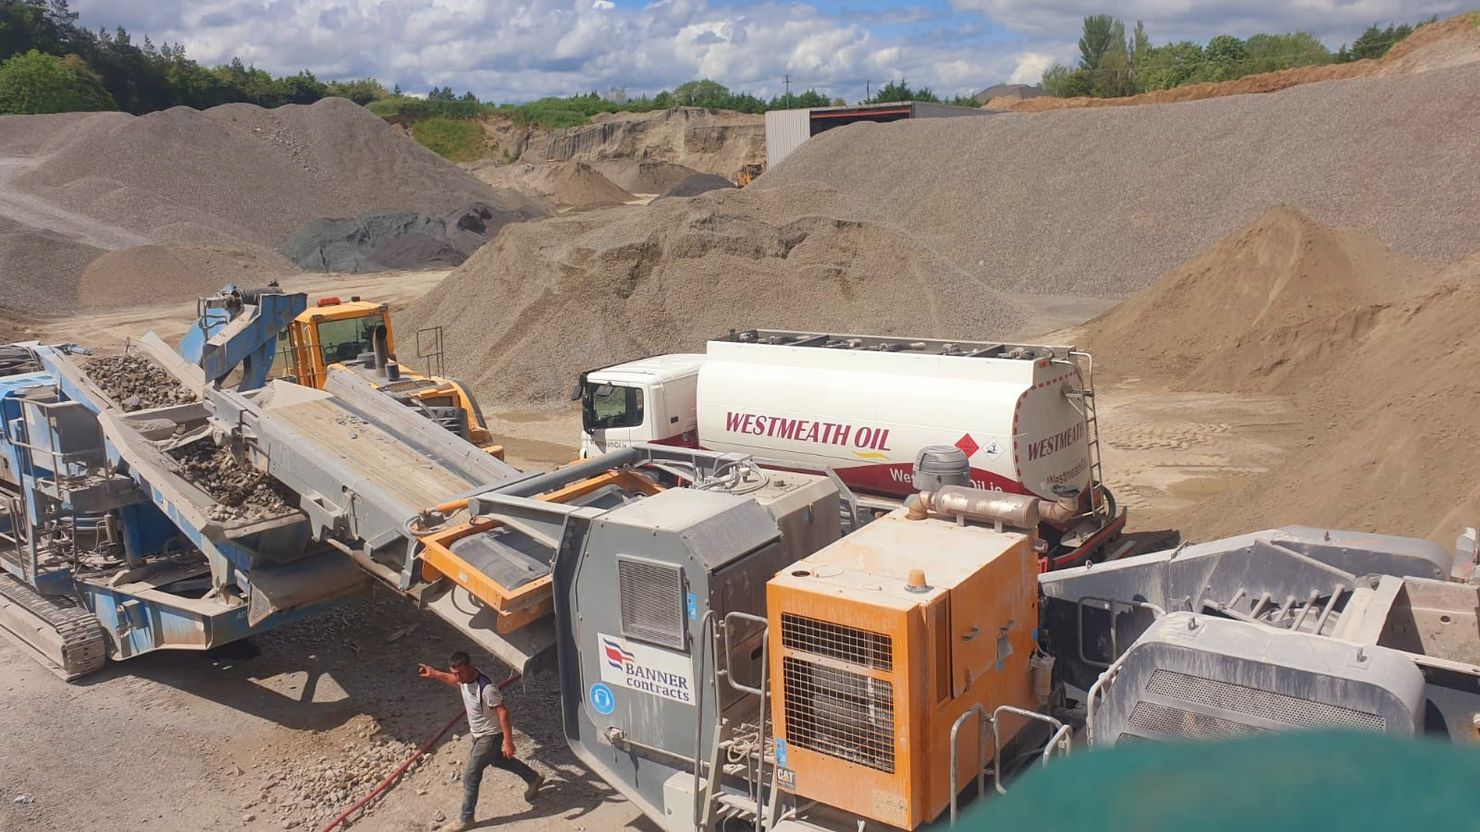 Westmeath Oil truck delivering commercial fuel to a quarry customer